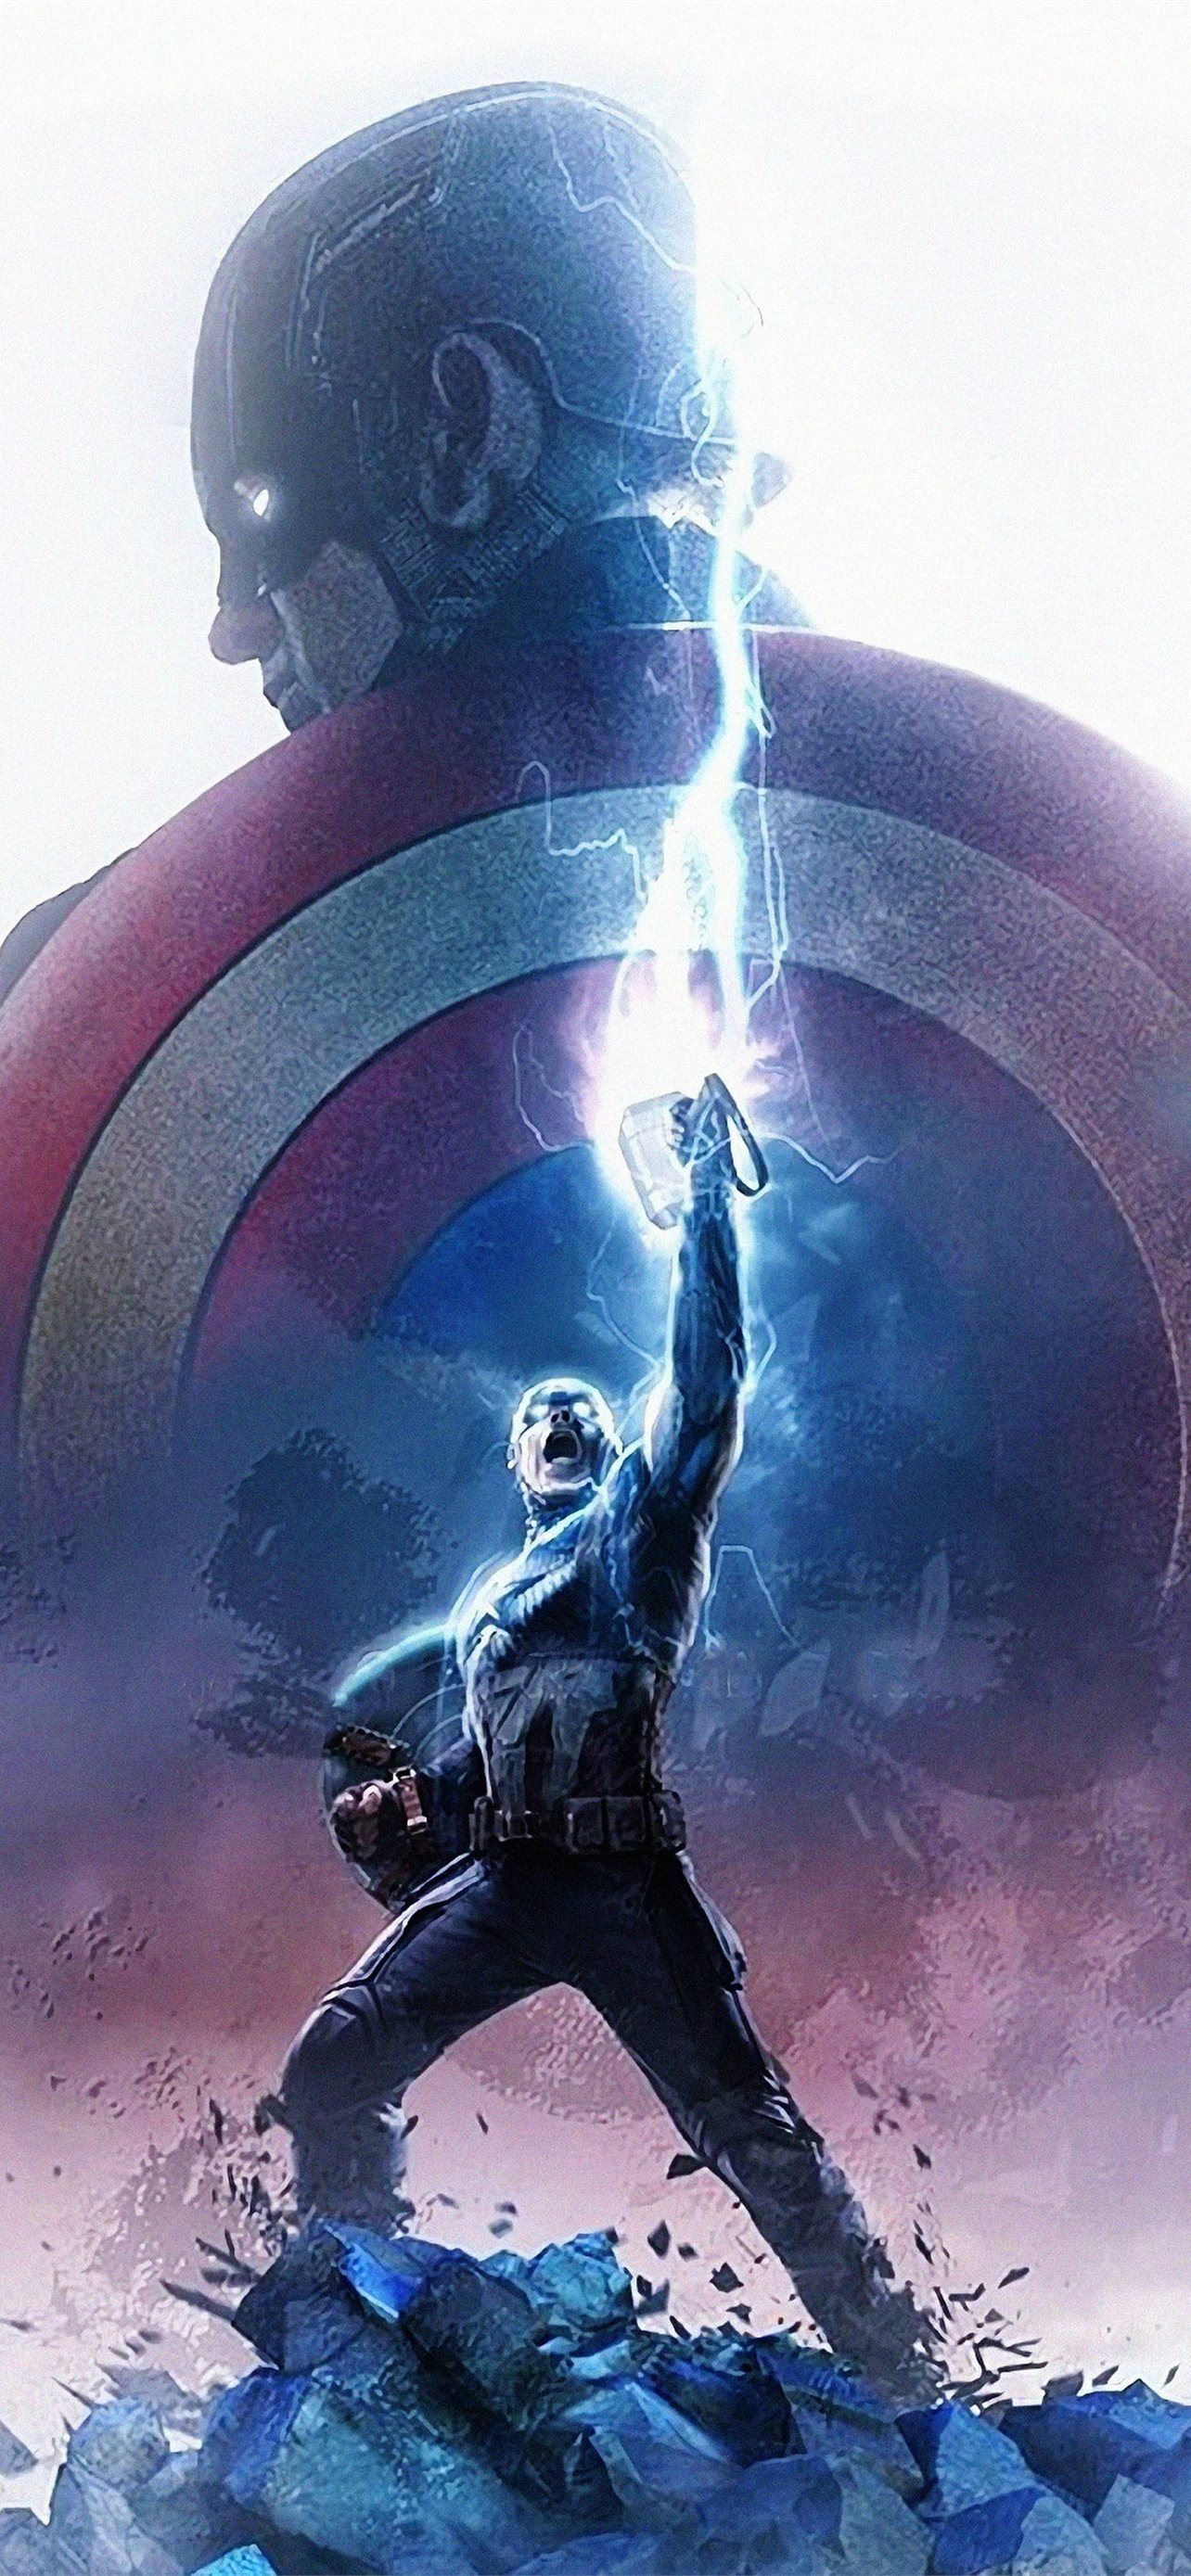 Shield Captain America With Thor'S Hammer Wallpapers